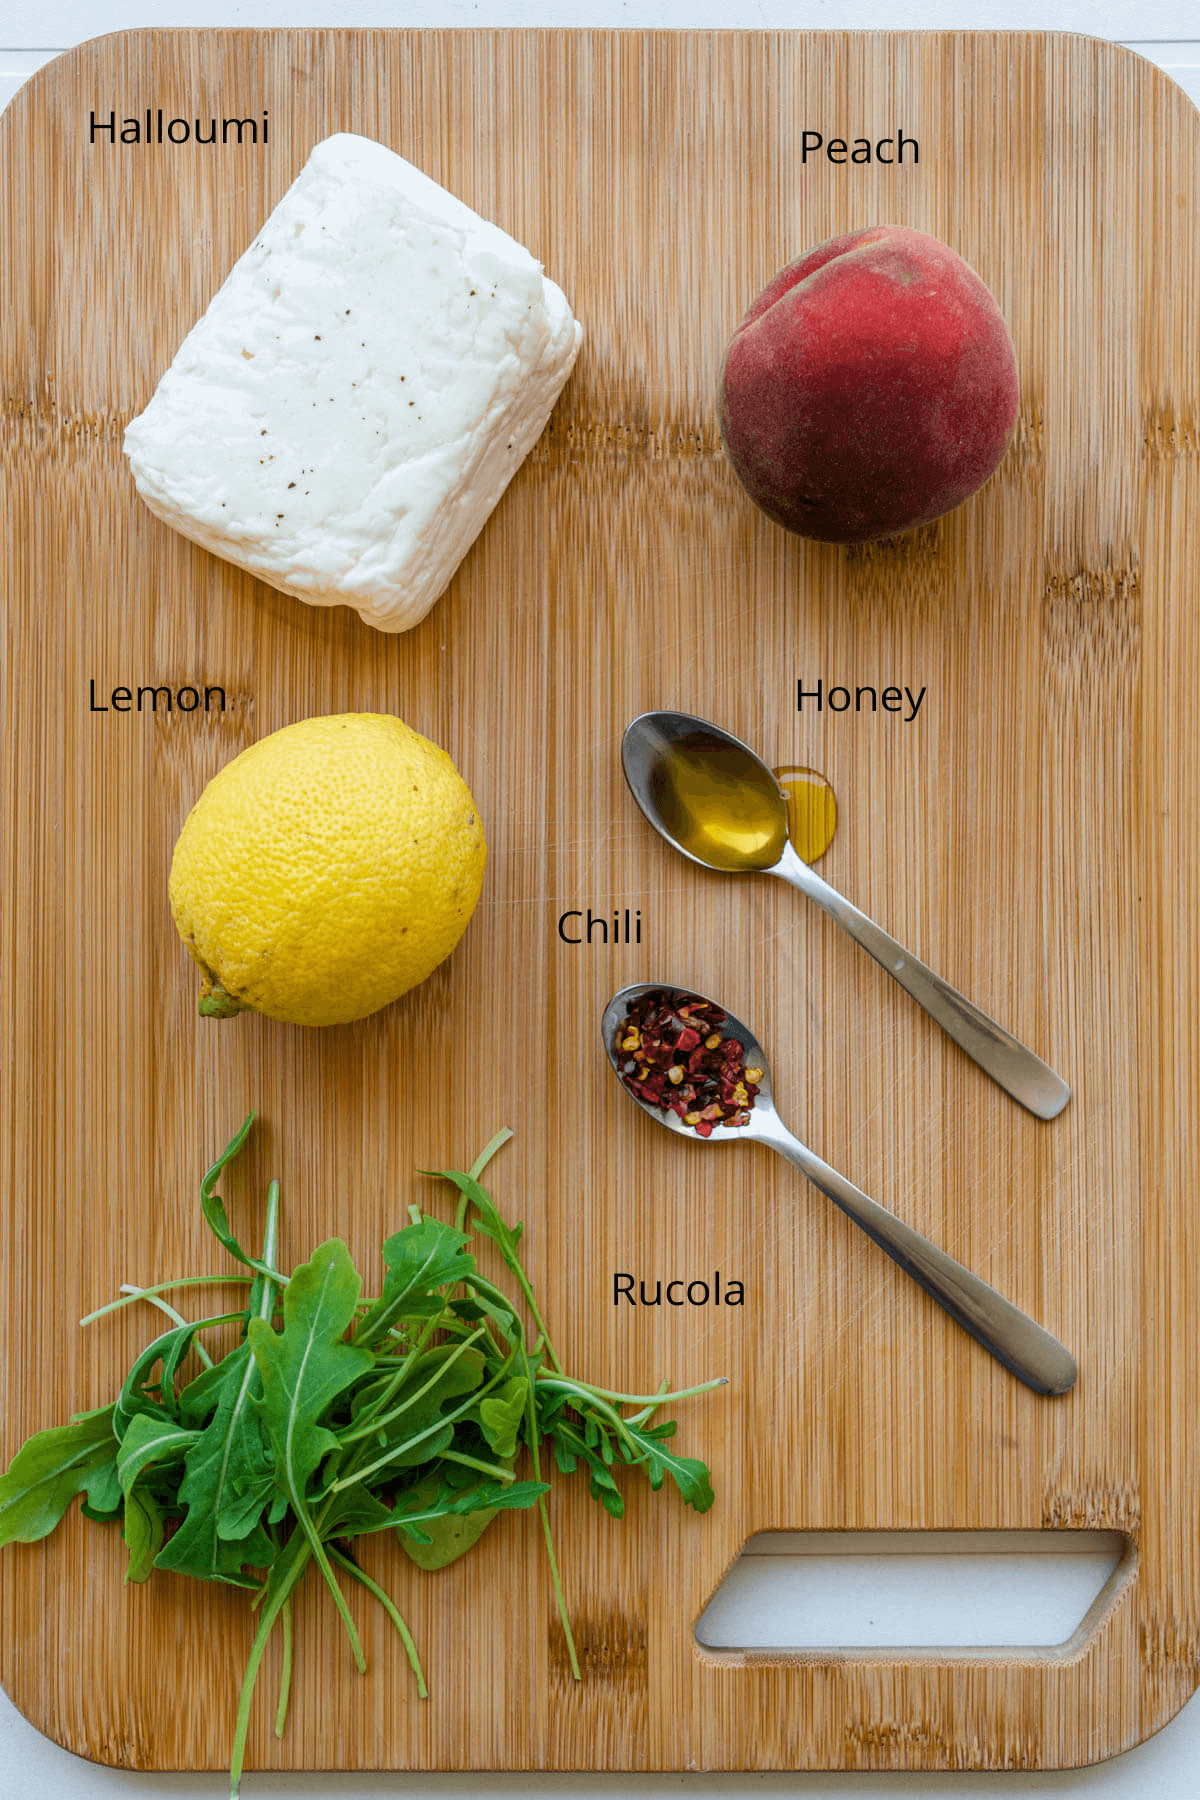 Ingredients on a chopping board to make Fried Halloumi with hot honey and peach